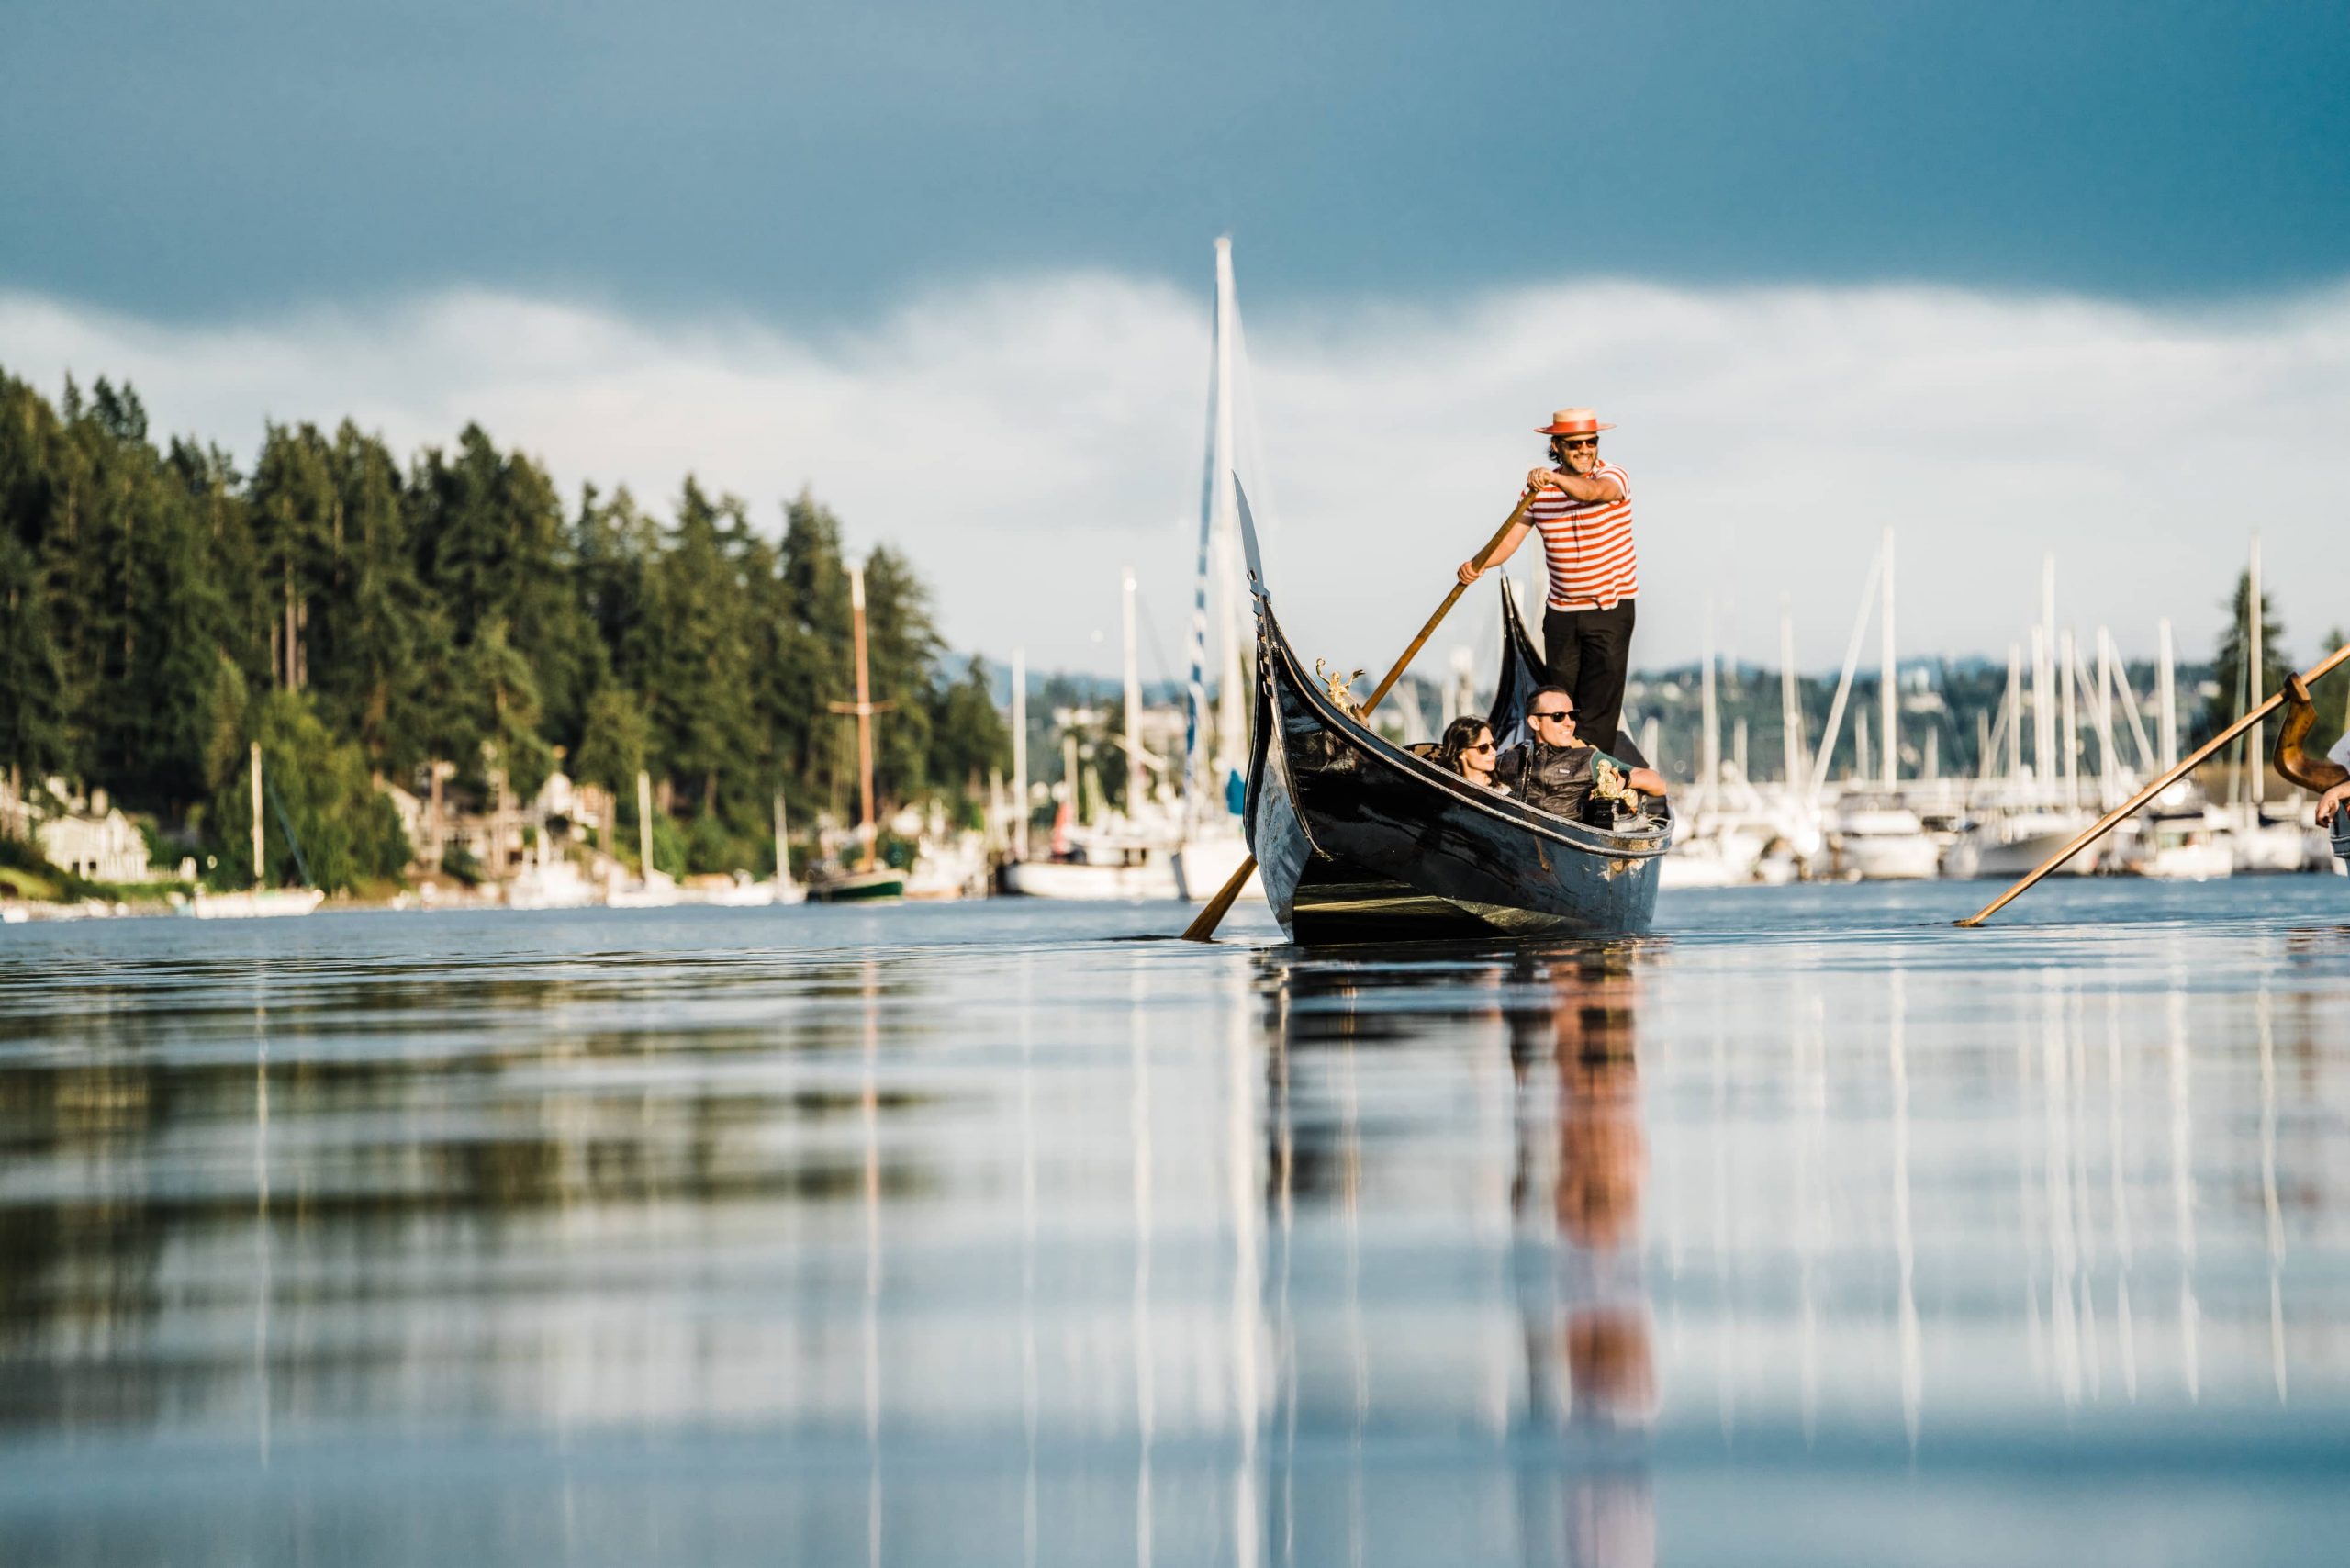 Read more about the article The Gig Harbor Gondola: Celebrating the Old Days of Venice on Puget Sound